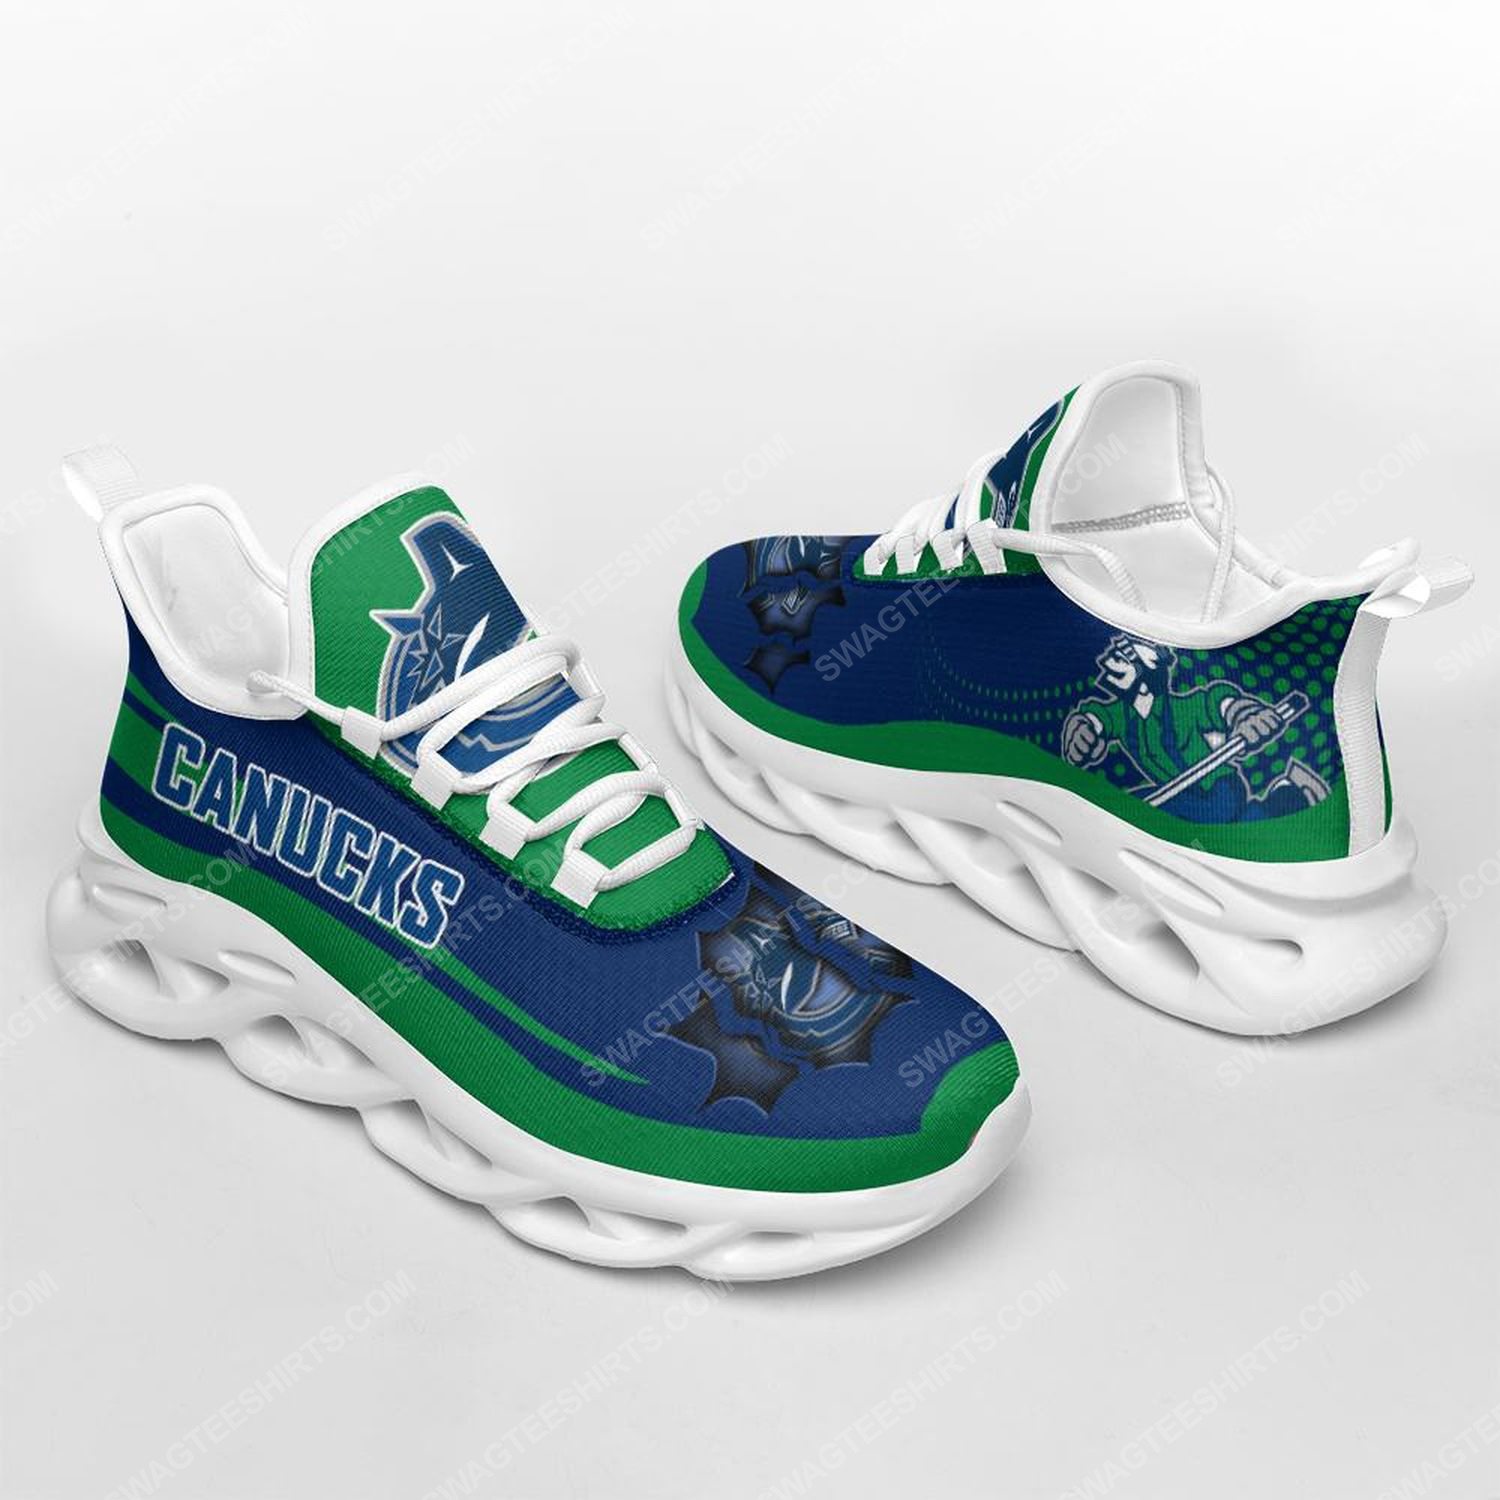 Vancouver canucks hockey team max soul shoes 1